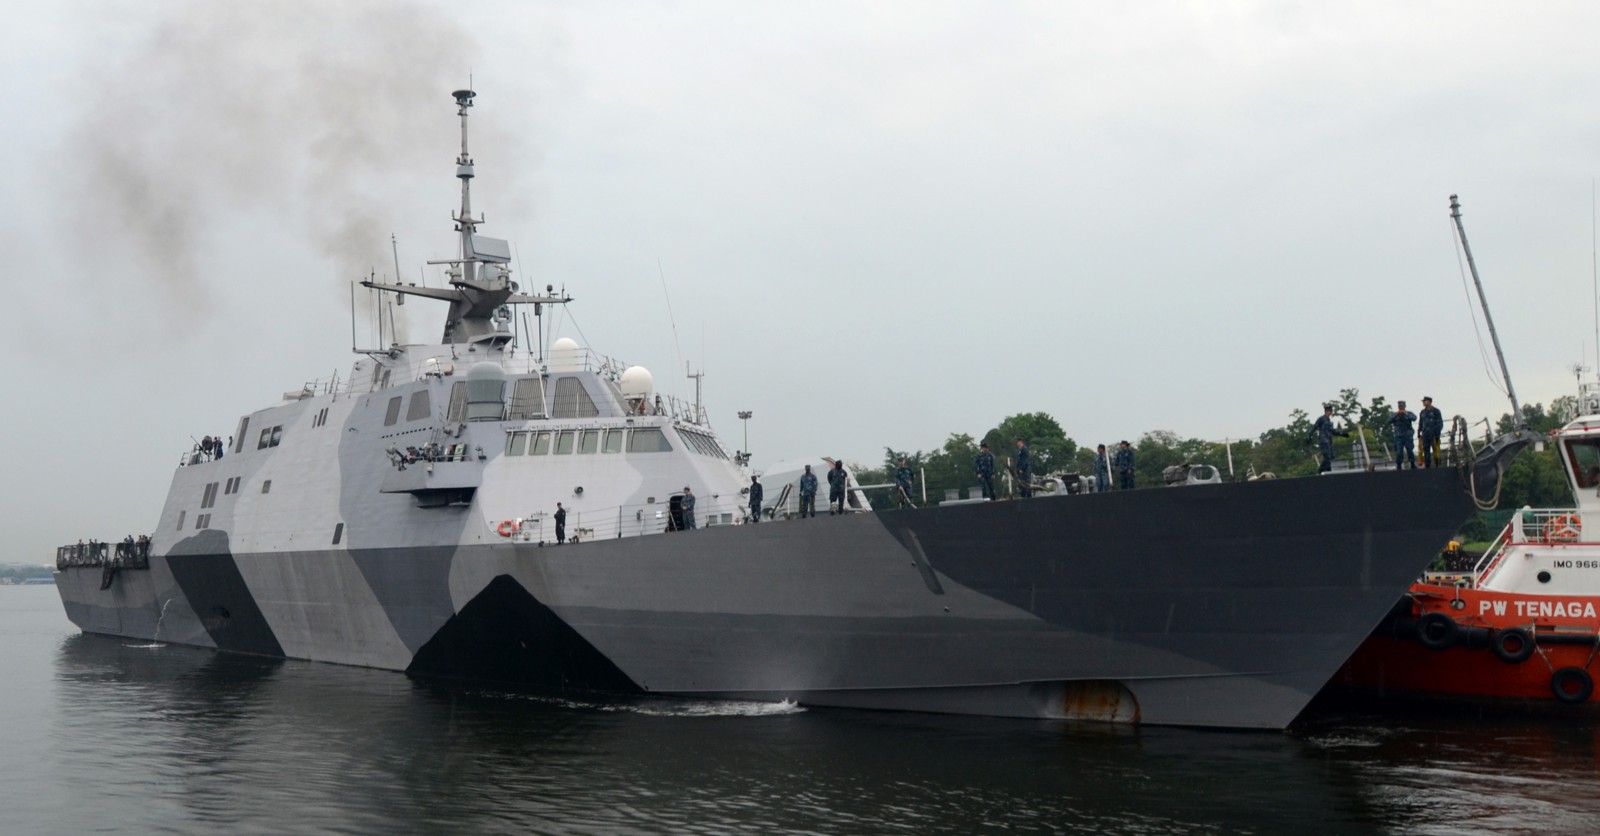 lcs-1 uss freedom class littoral combat ship us navy 25 singapore